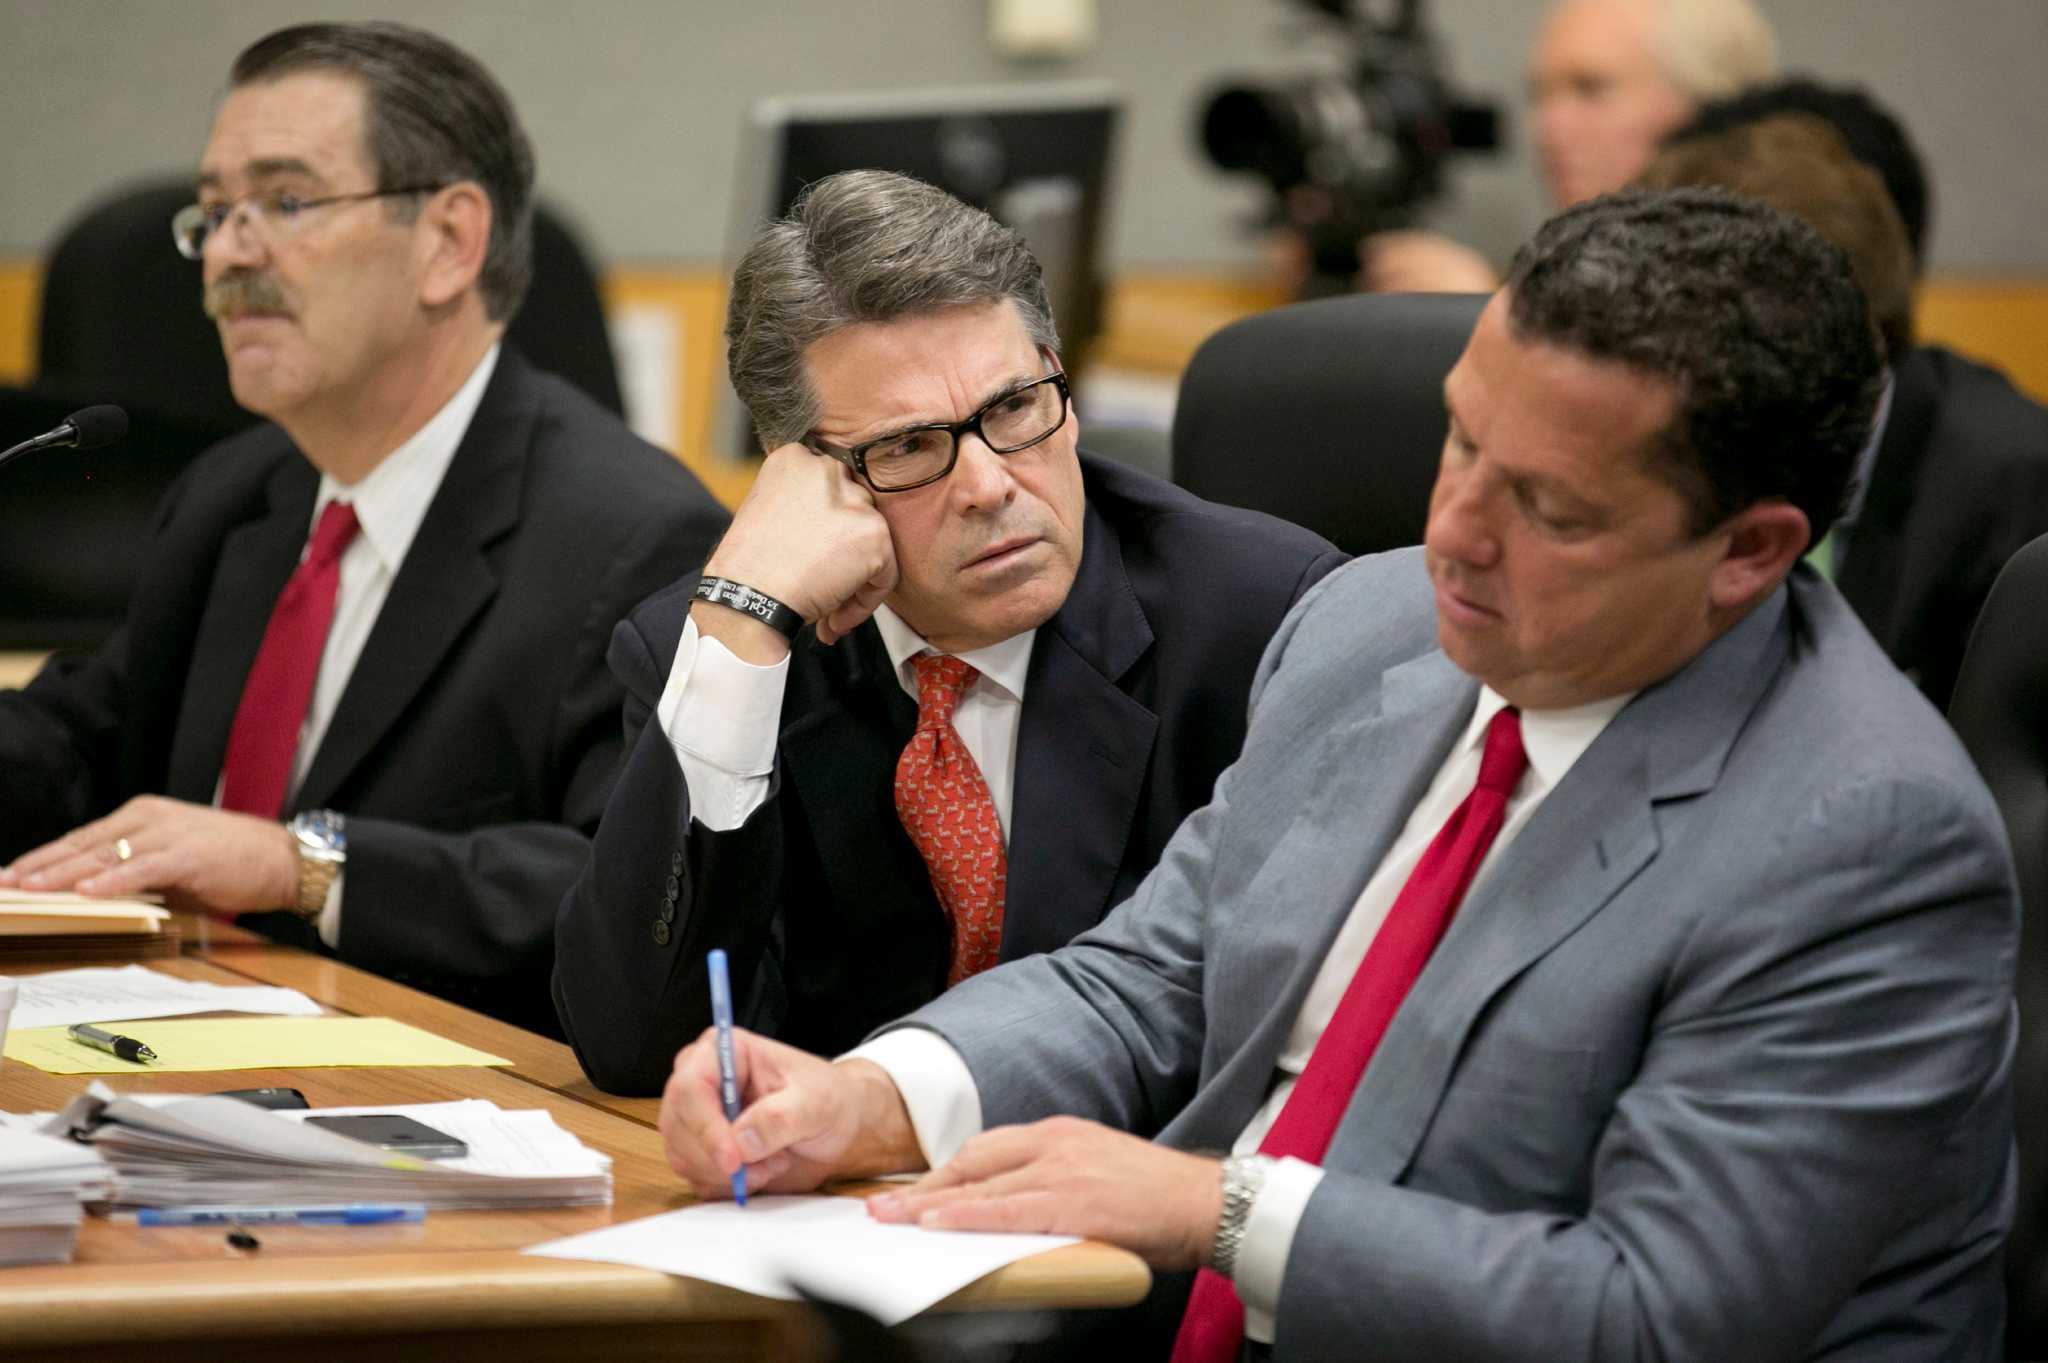 Rick Perry Again Asks State Judge To Toss Indictment Citing Vague Charges